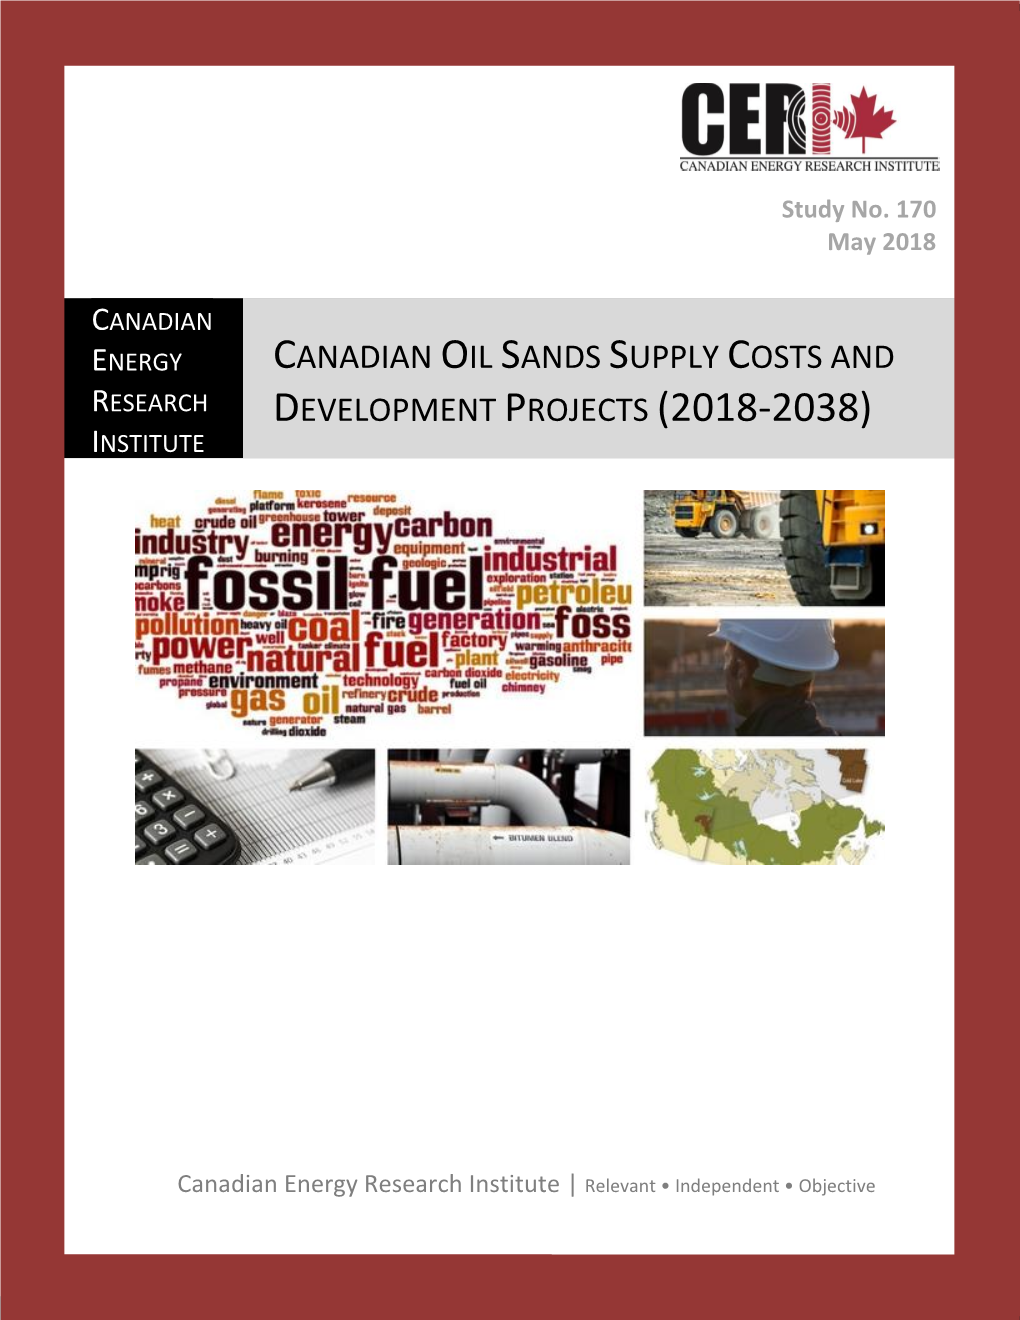 Canadian Oil Sands Supply Costs and Development Projects (2018-2038)